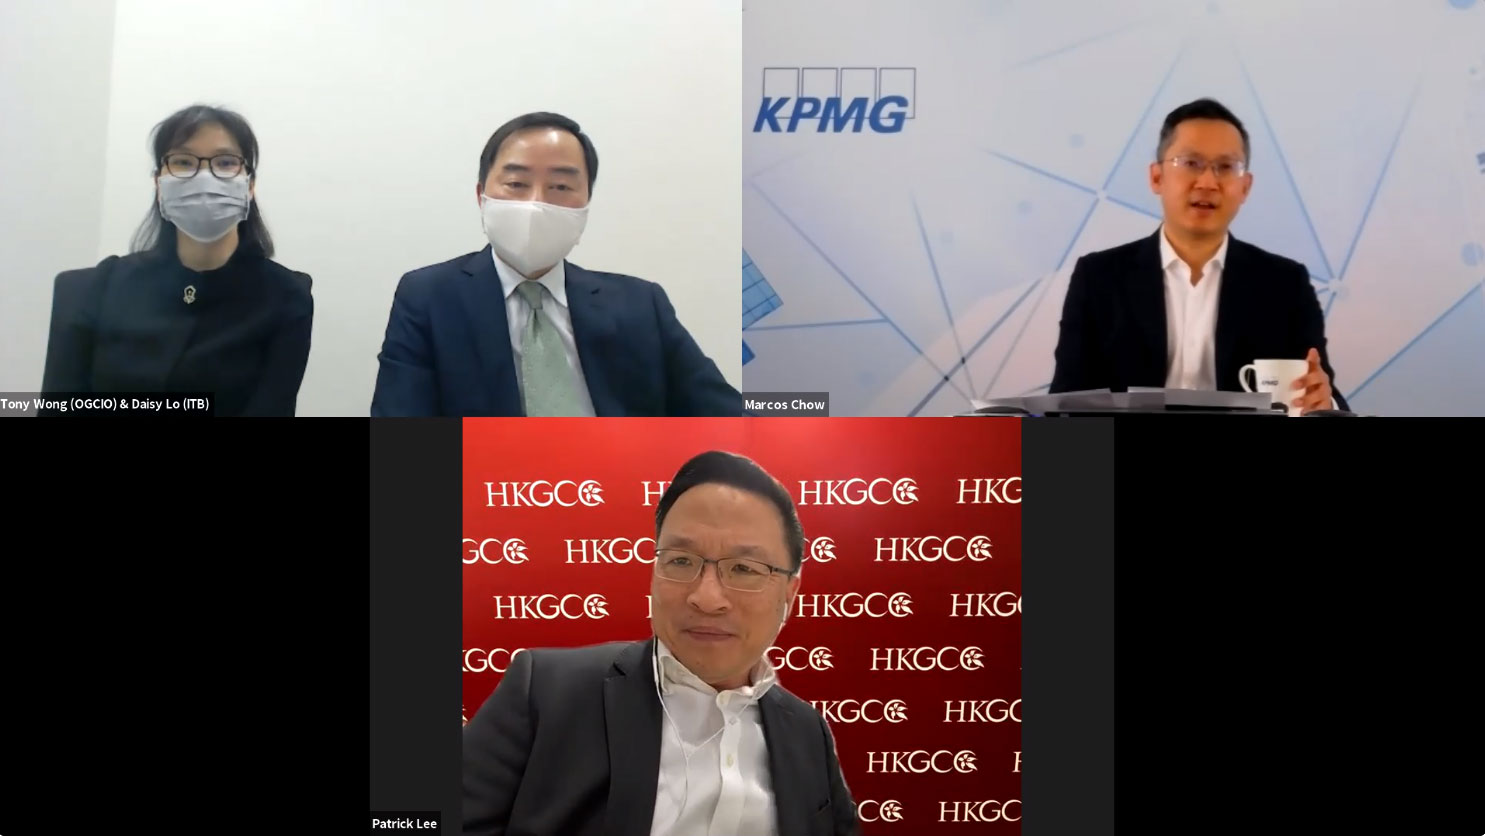 Mr. Tony Wong, Deputy Government Chief Information Officer (top middle); and Ms. Daisy Lo, Principal Assistant Secretary for Innovation & Technology (top left), join panel discussion with Mr. Marcos Chow, Partner, IT Advisory/Head of Technology Enablement of KPMG China (top right); and Mr. Patrick Lee, Convenor of HKGCC Smart City Working Group (bottom).